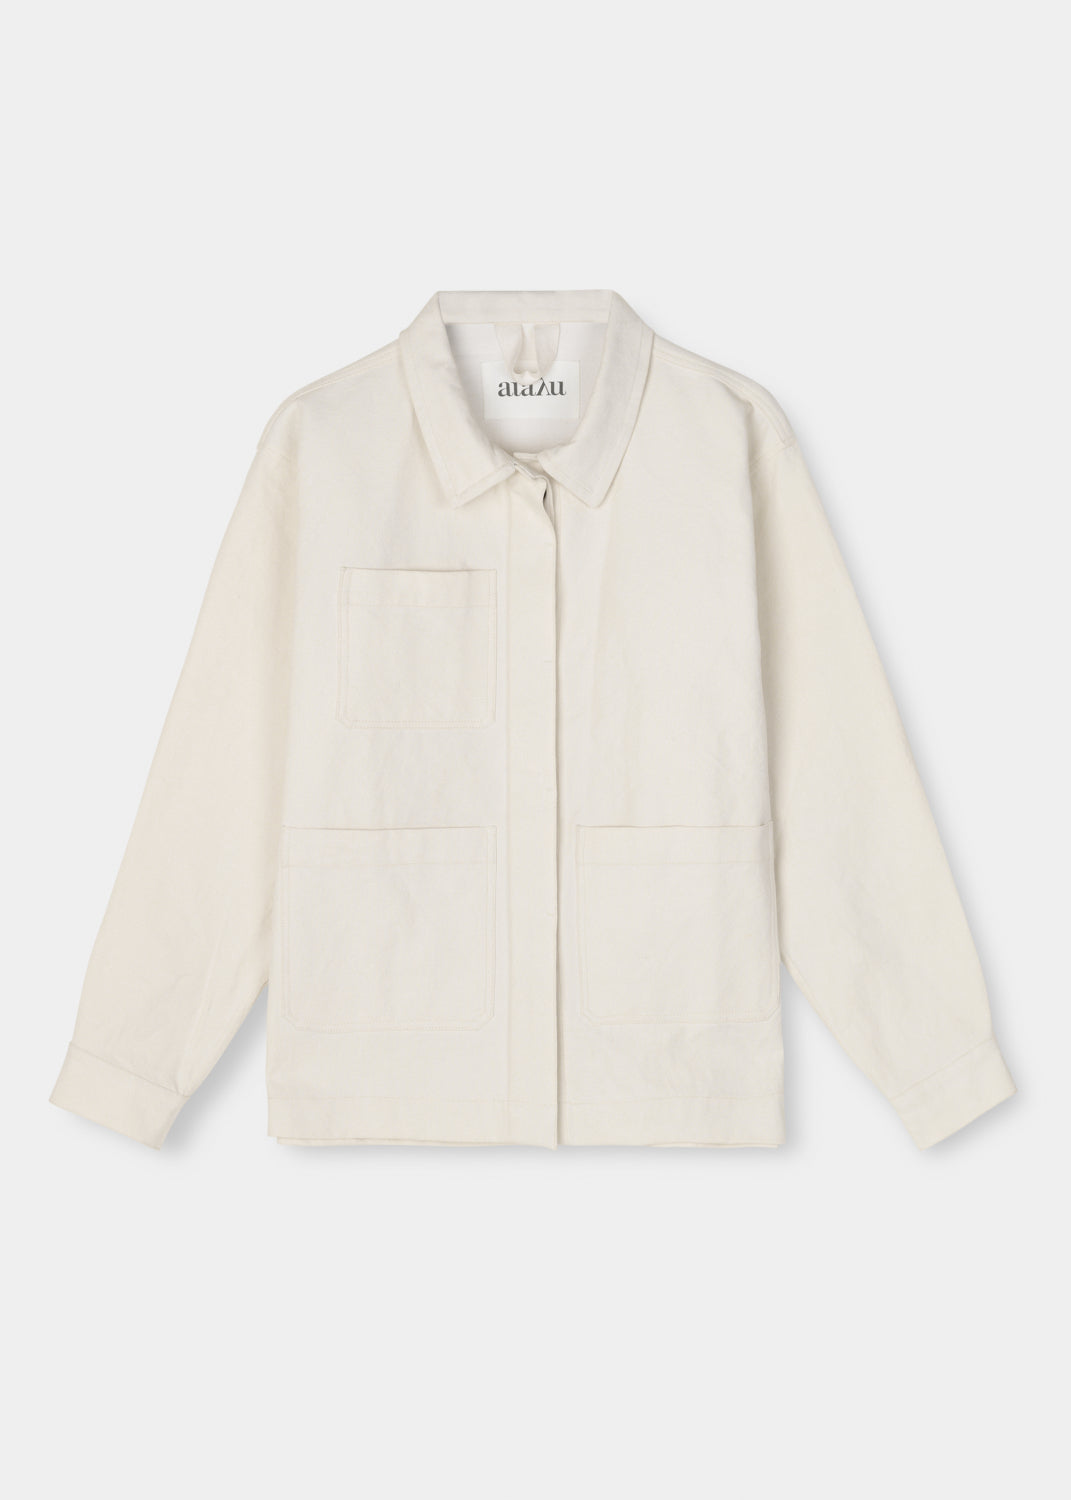 Aiayu "Jacket Canvas" Off White